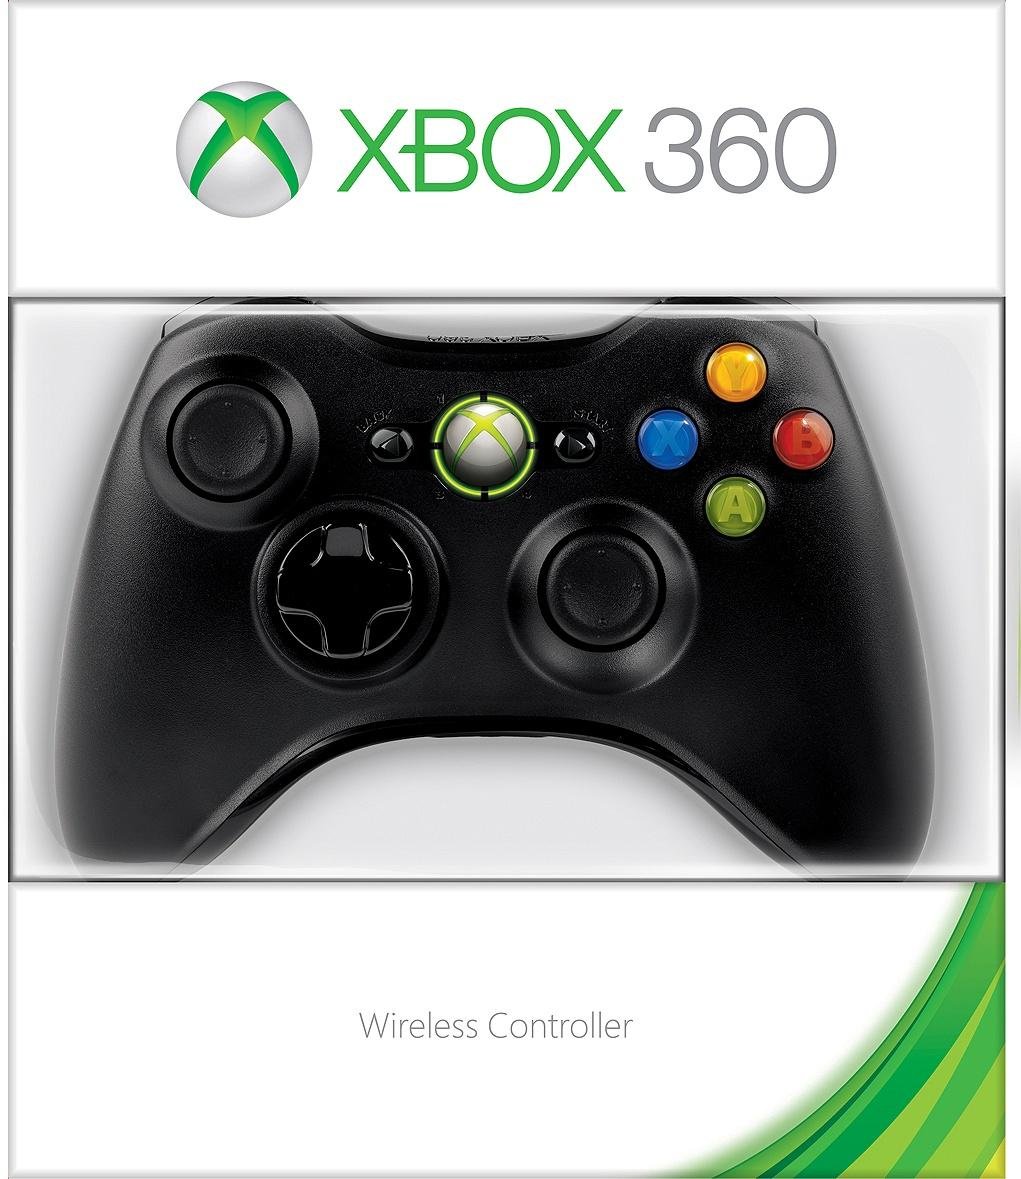 Xbox 360 Official Wireless Controller - Black